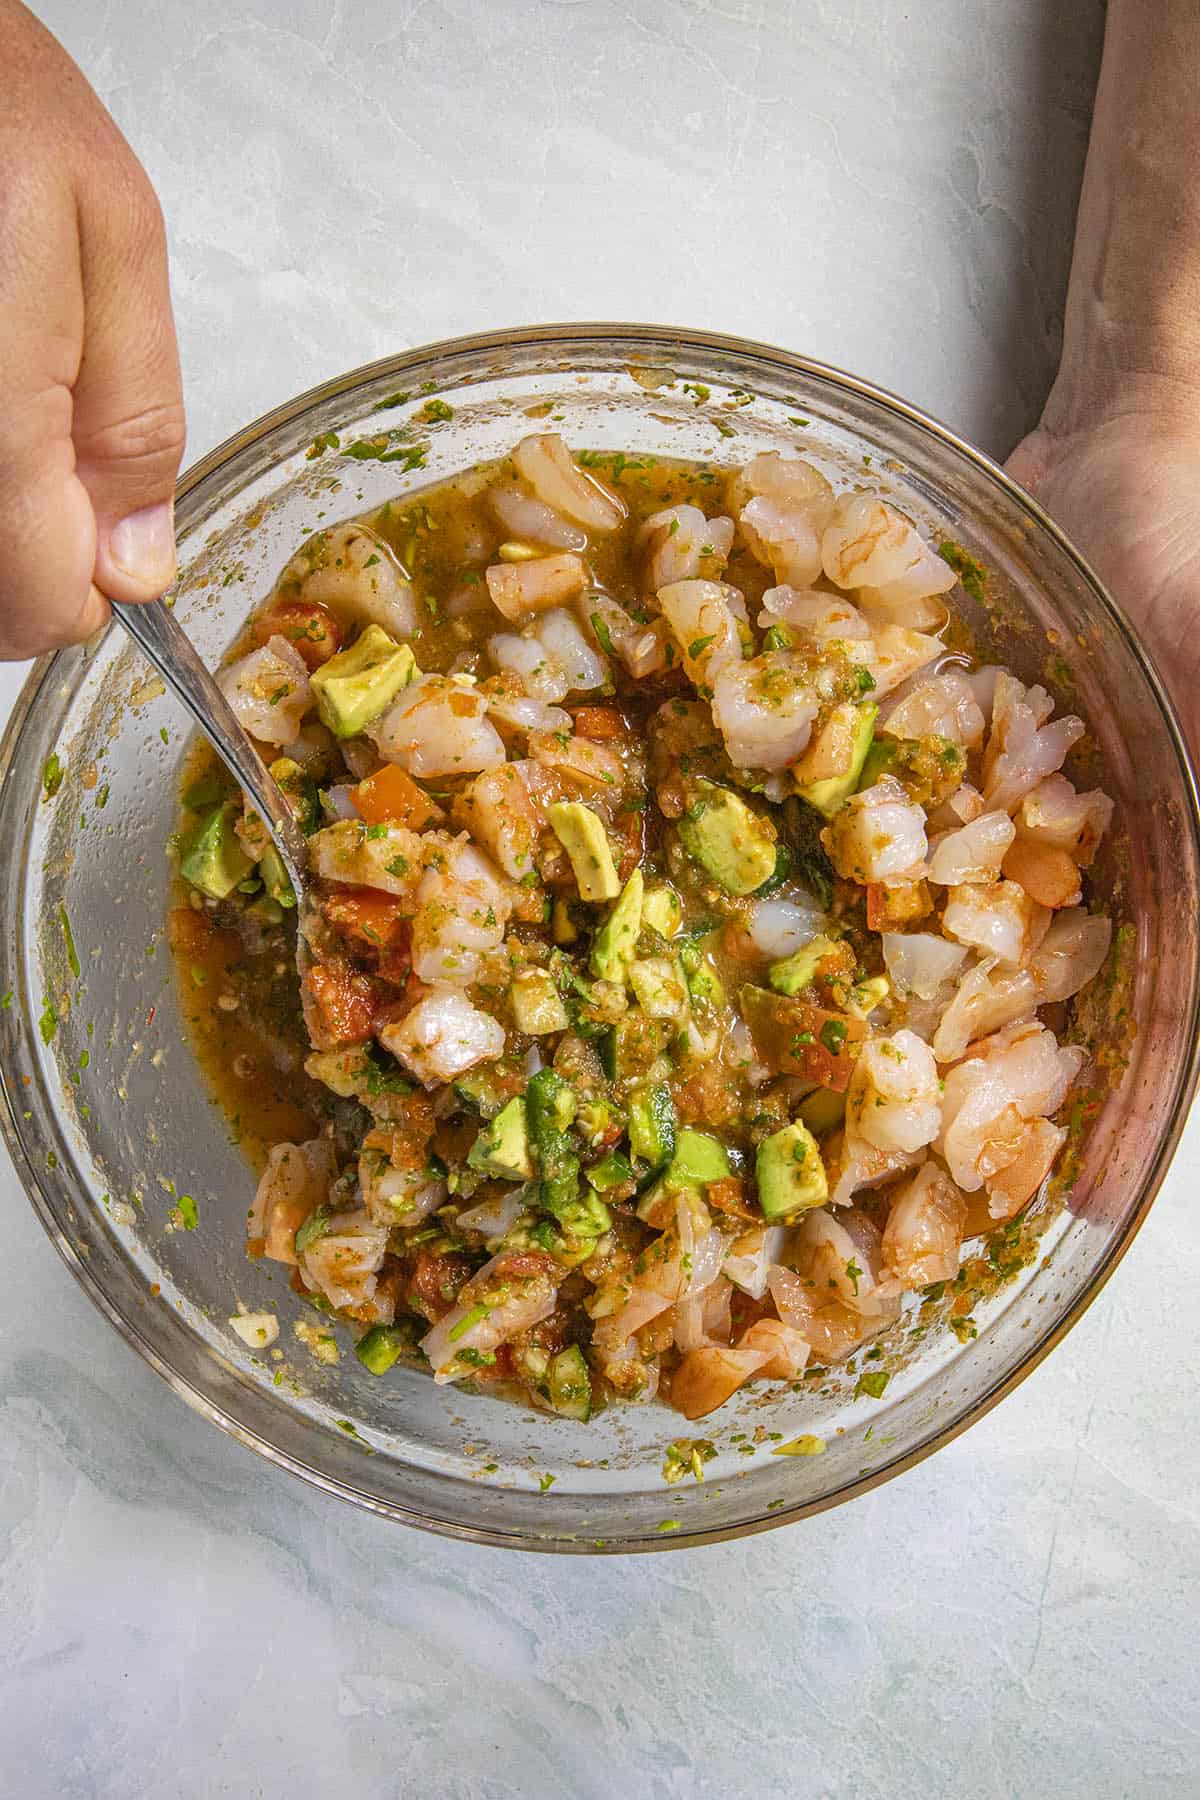 Mixing shrimp into the bowl to make Mexican Shrimp Cocktail